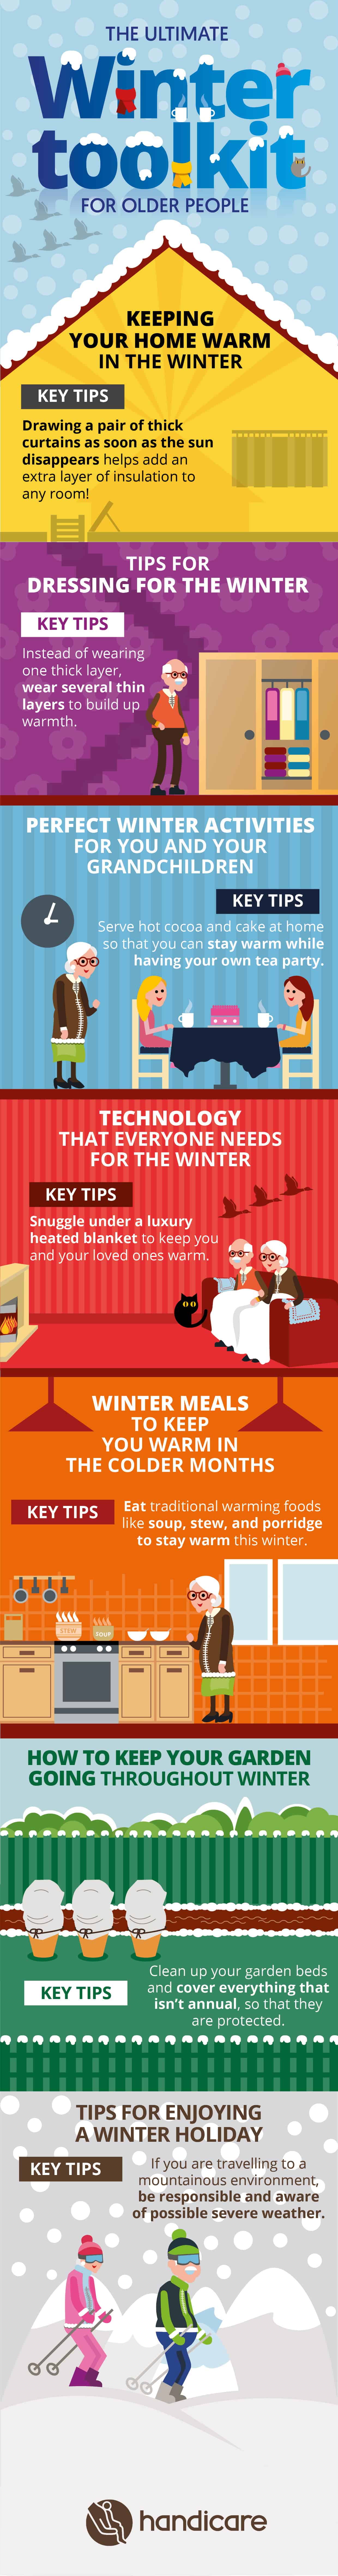 ultimate winter toolkit for older people infographic